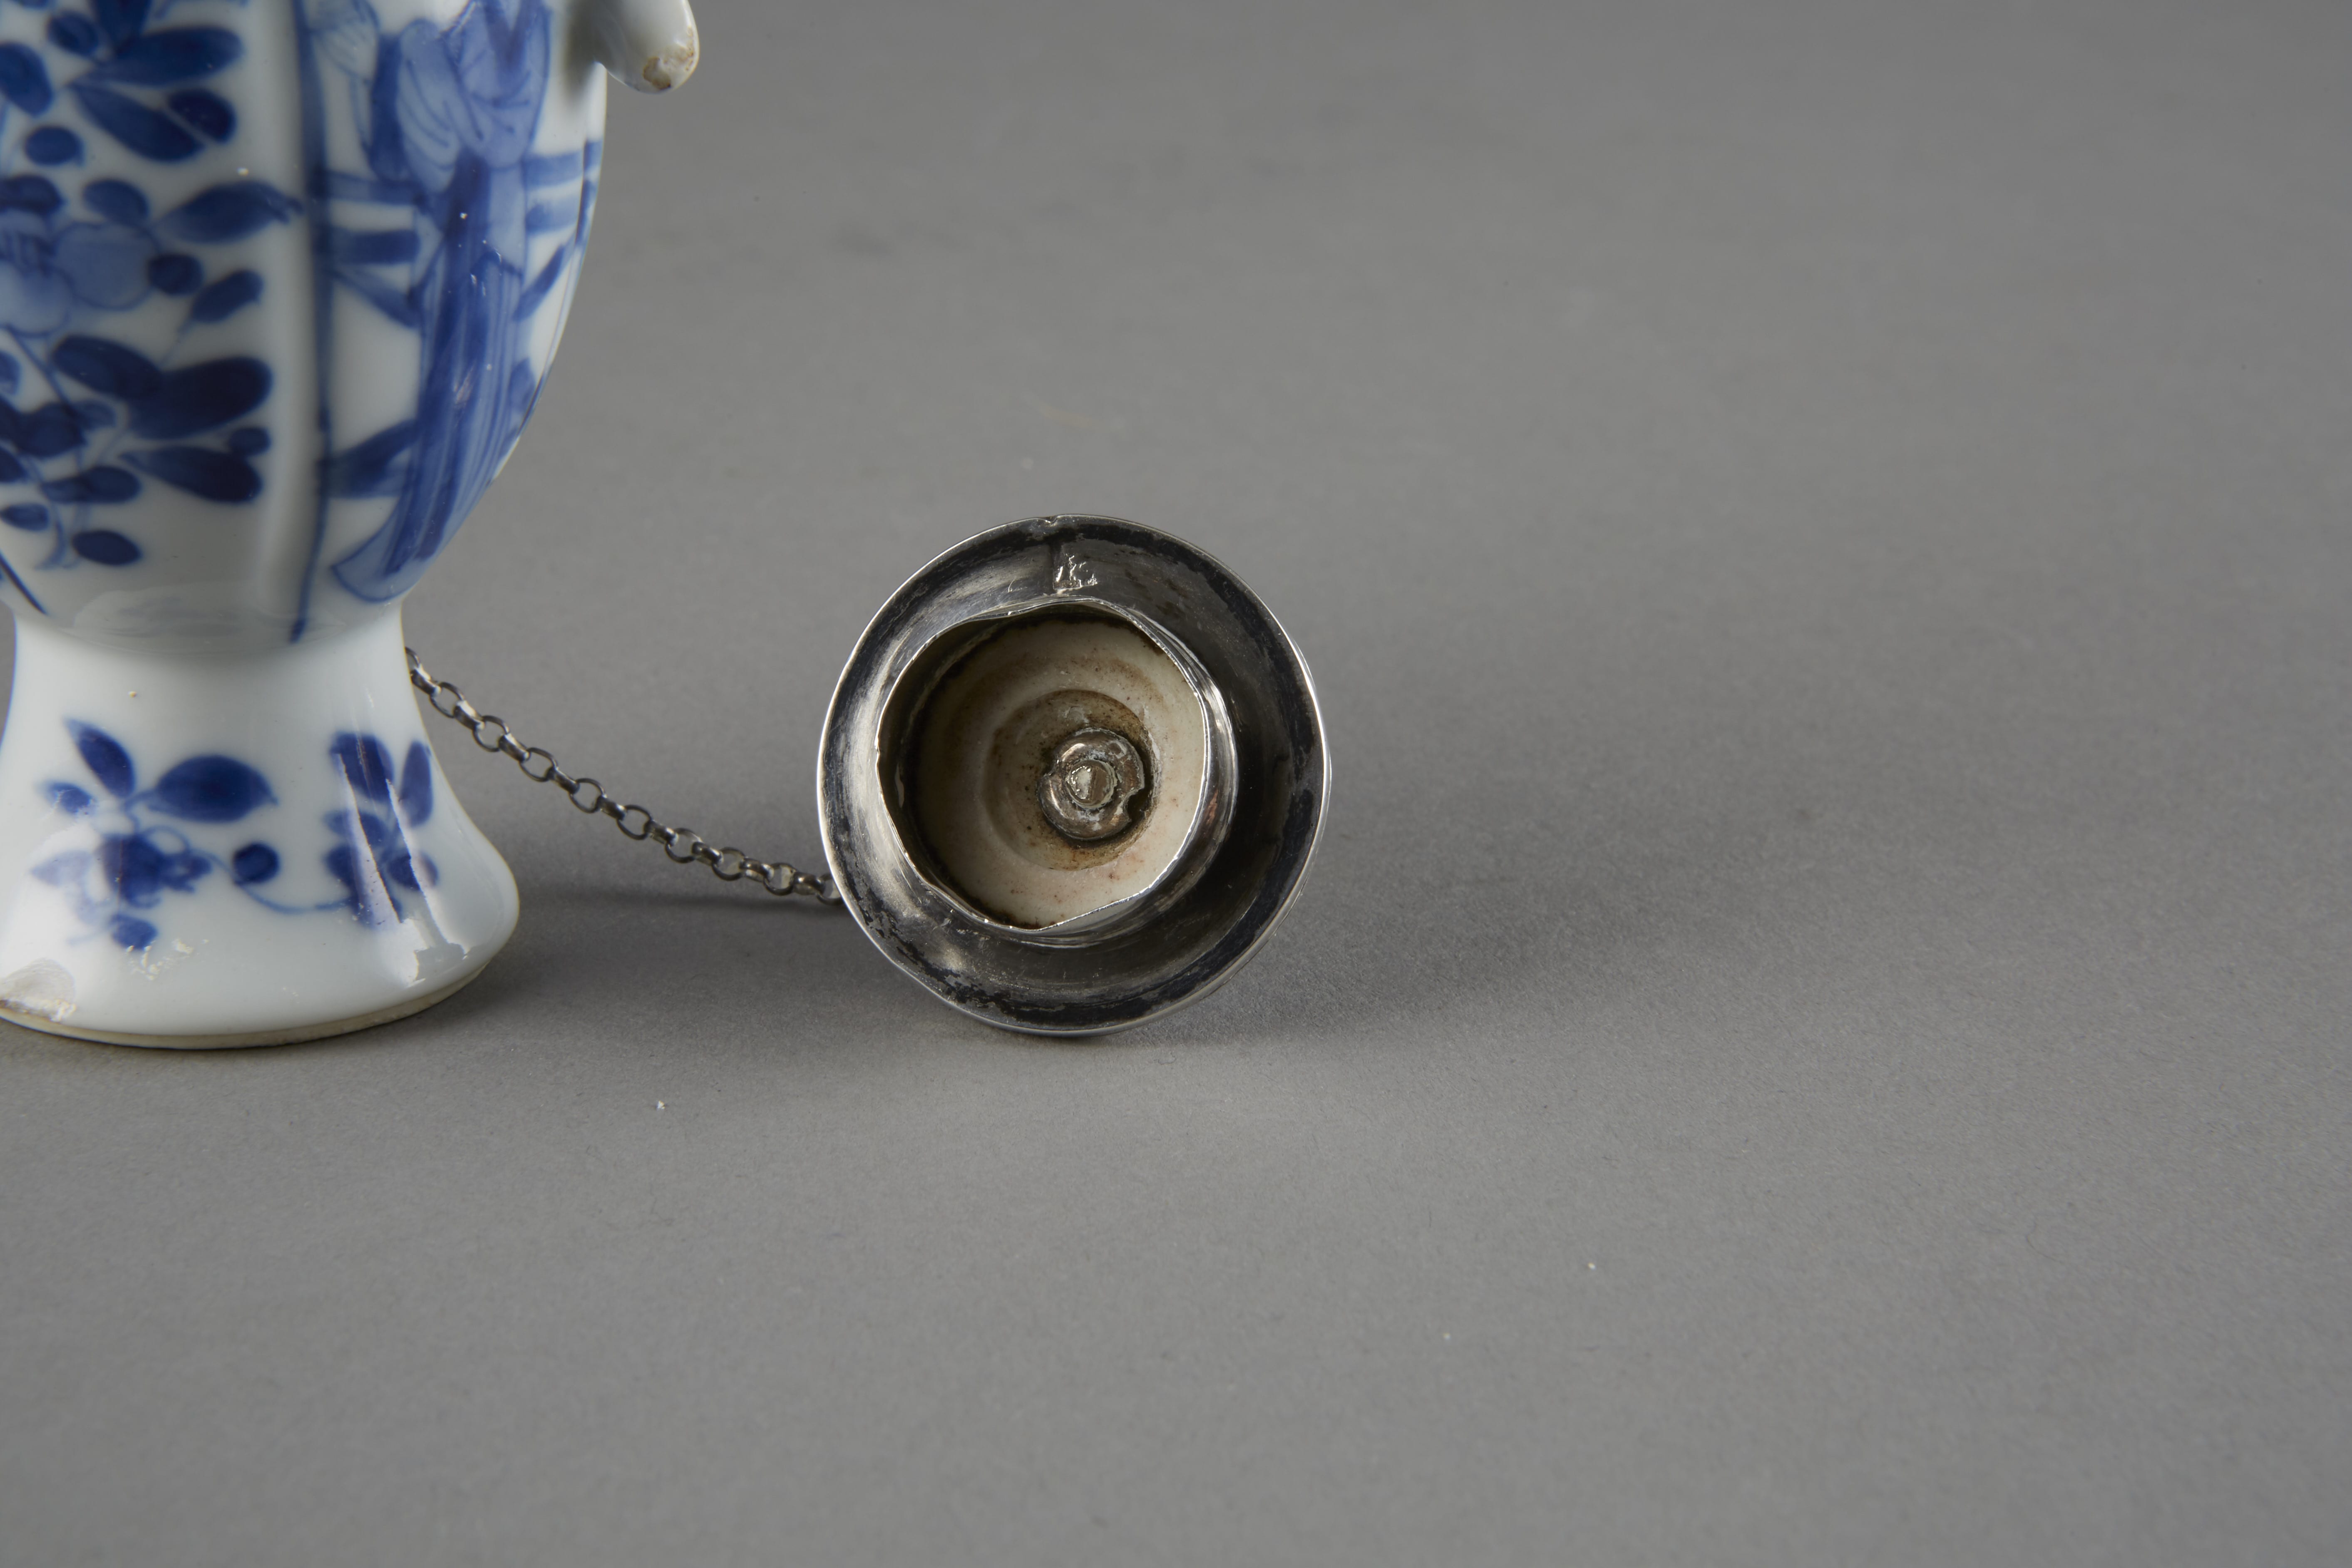 Lot 087: Chinese 18th Century Kangxi Blue and White Export Porcelain Silver Mounted Wine Ewer